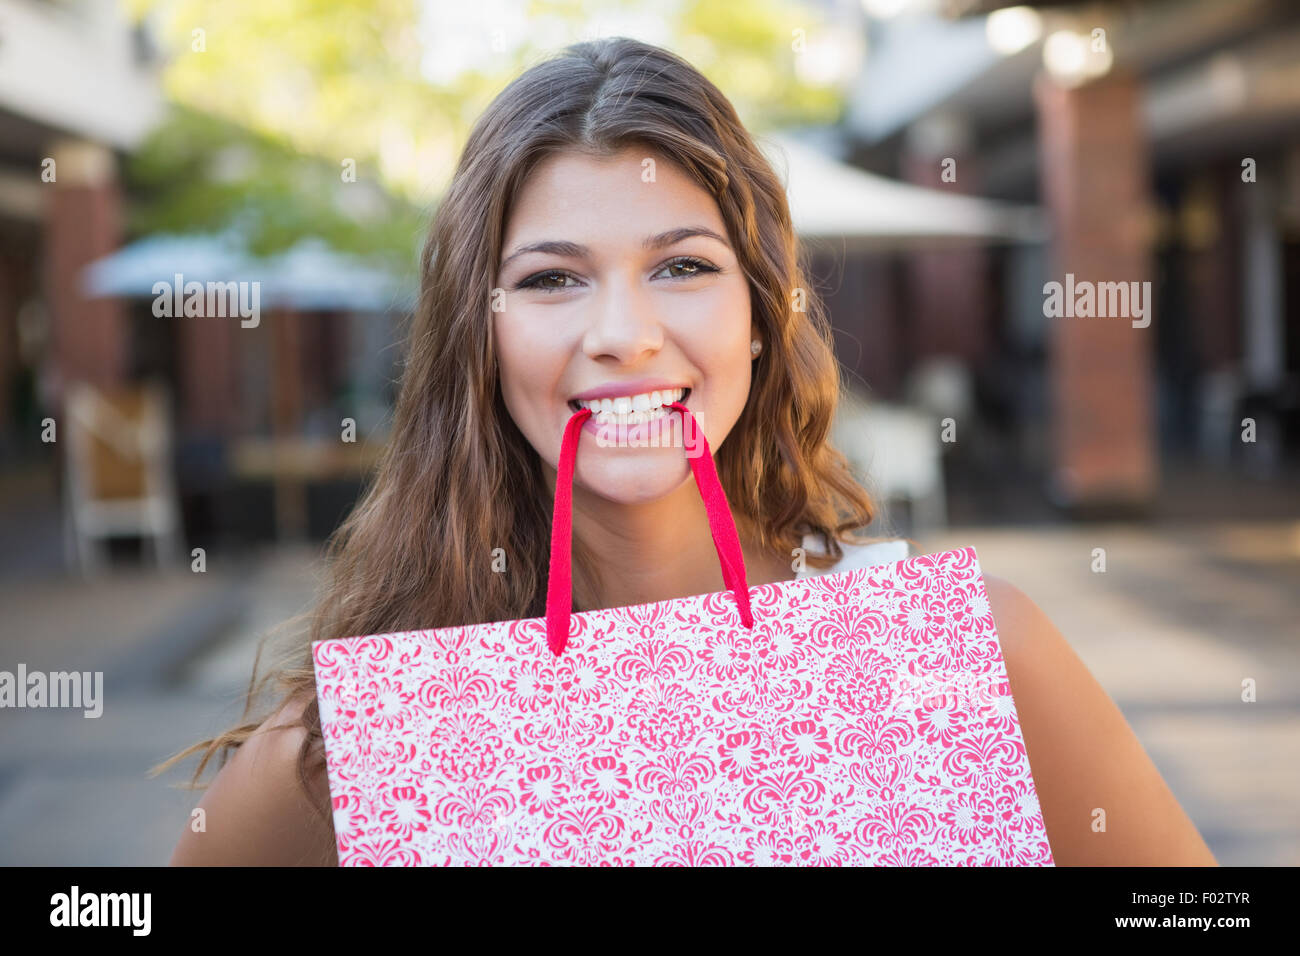 Portrait of smiling woman holding shopping bag in her mouth Stock Photo